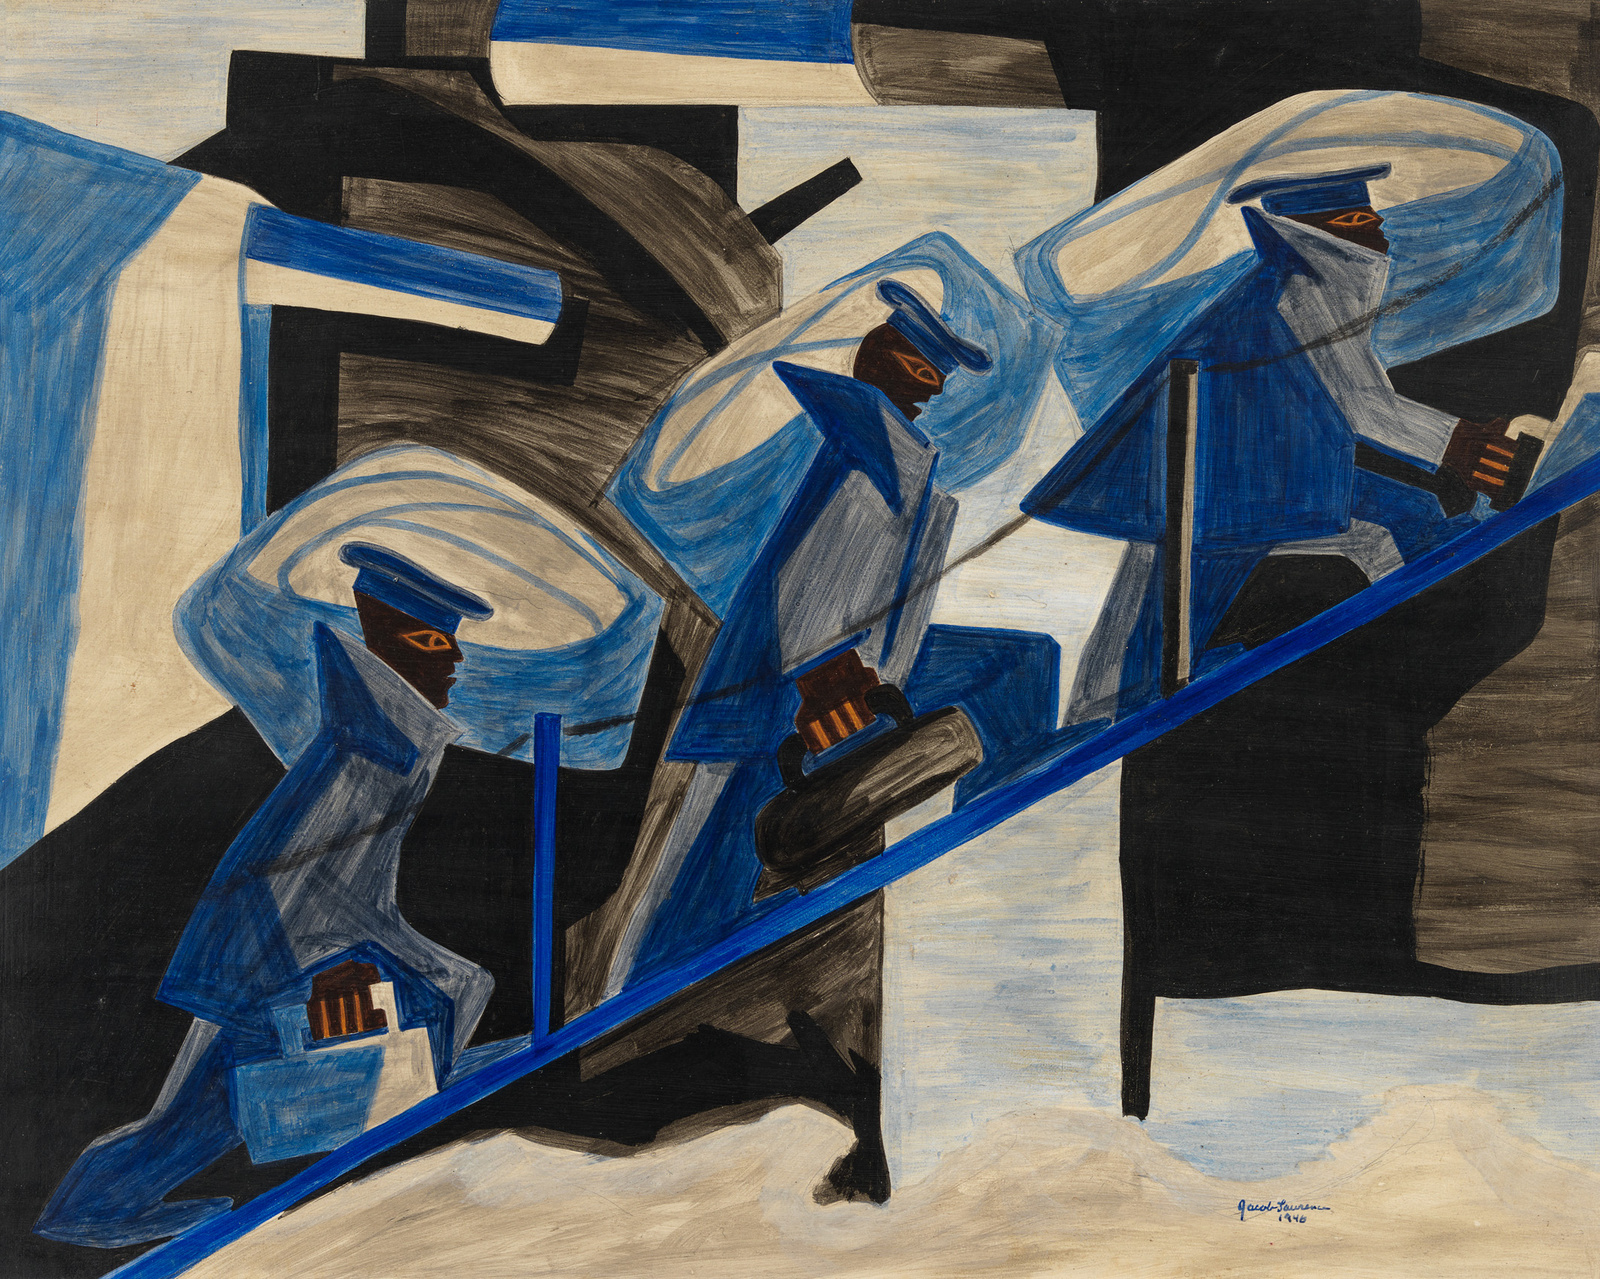 Three Black figures in geometric blue and grey suits and hats carry large sacks over their shoulders and march in unison up a roped-off incline.